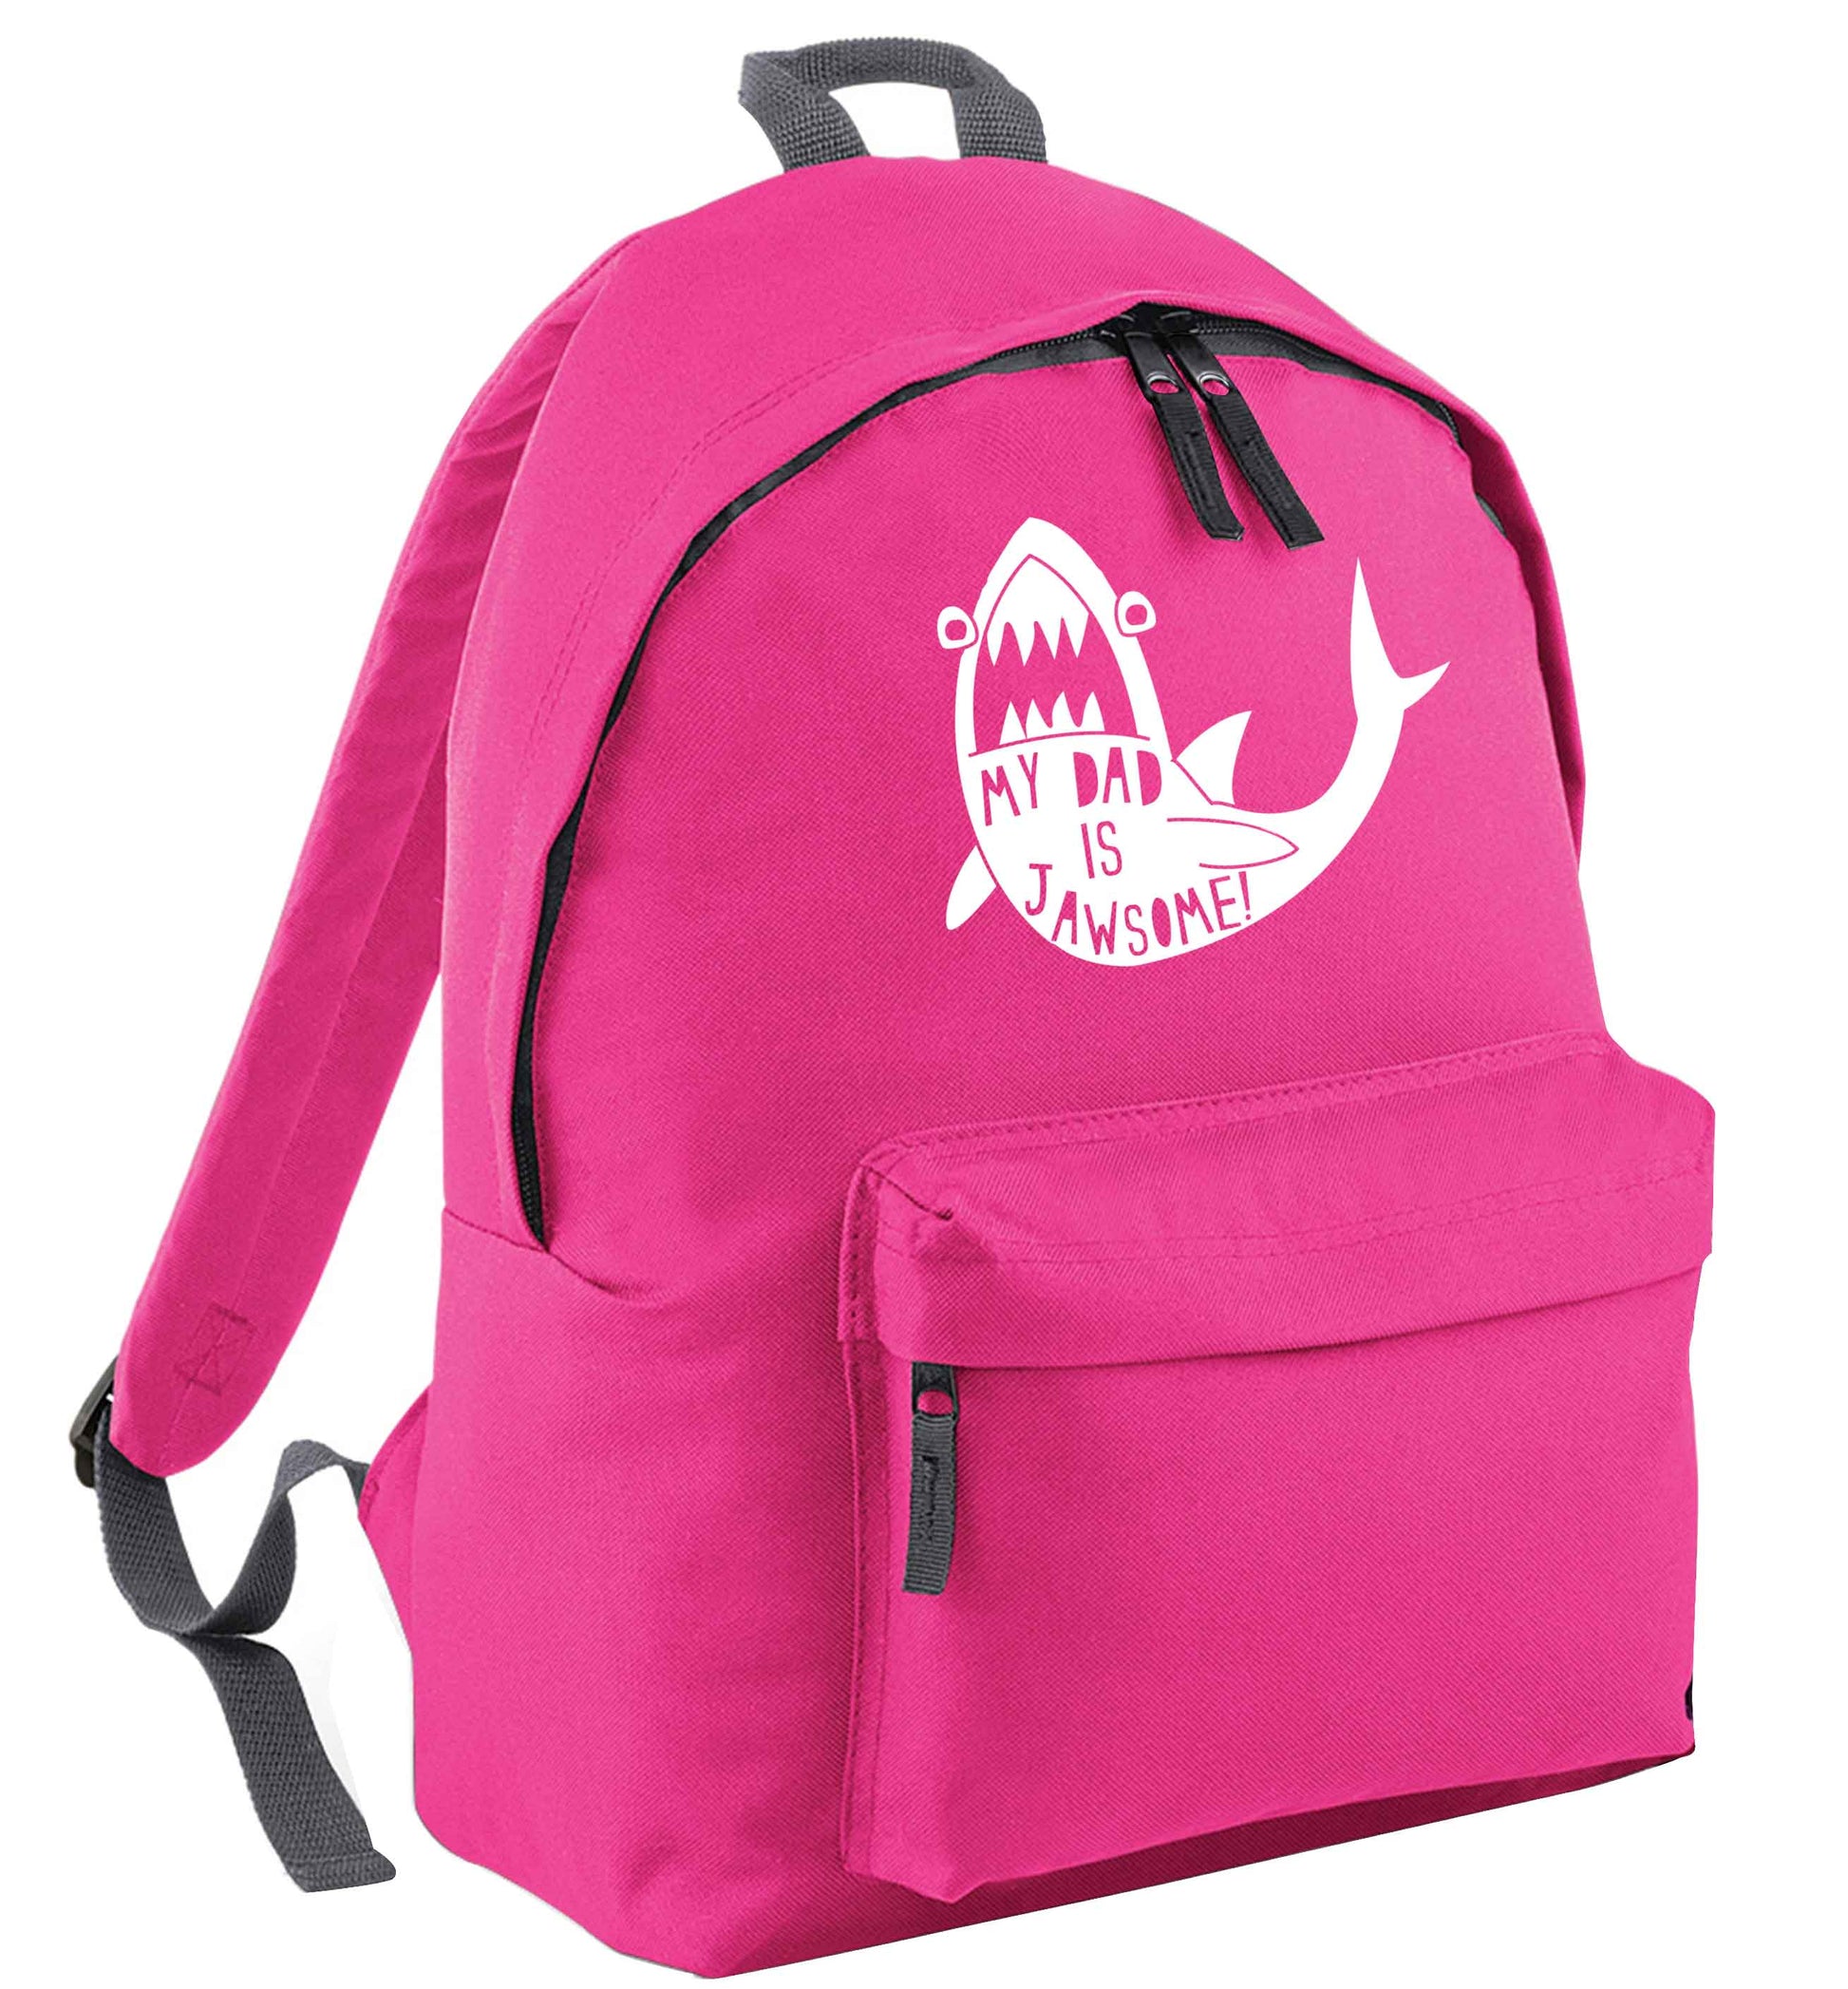 My Dad is jawsome pink adults backpack